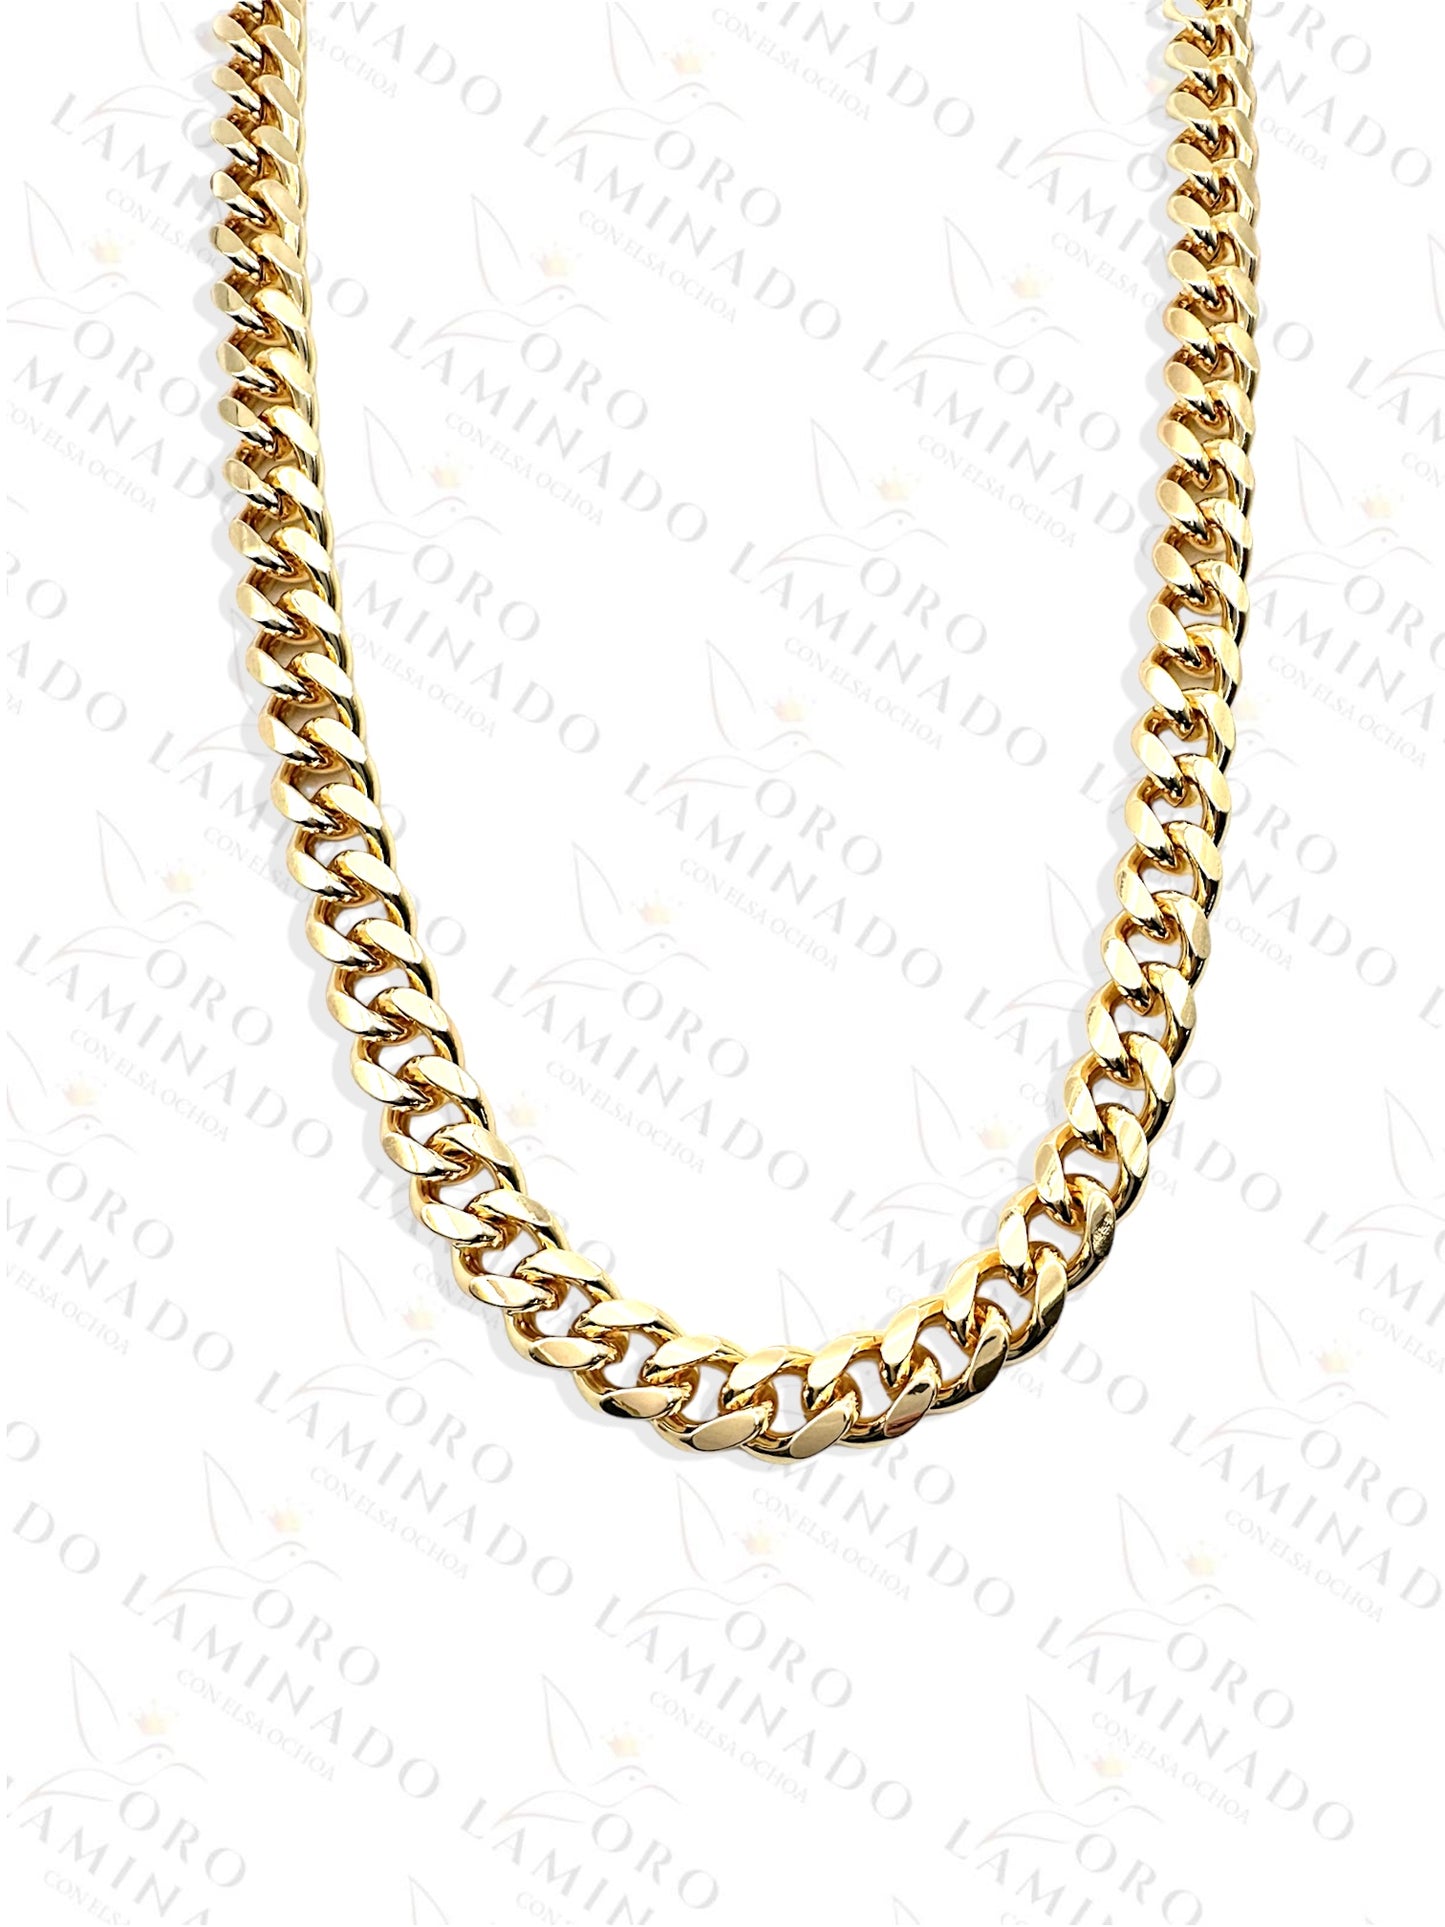 Cuban Pack of 3 Chains Size 22" 10mm B59